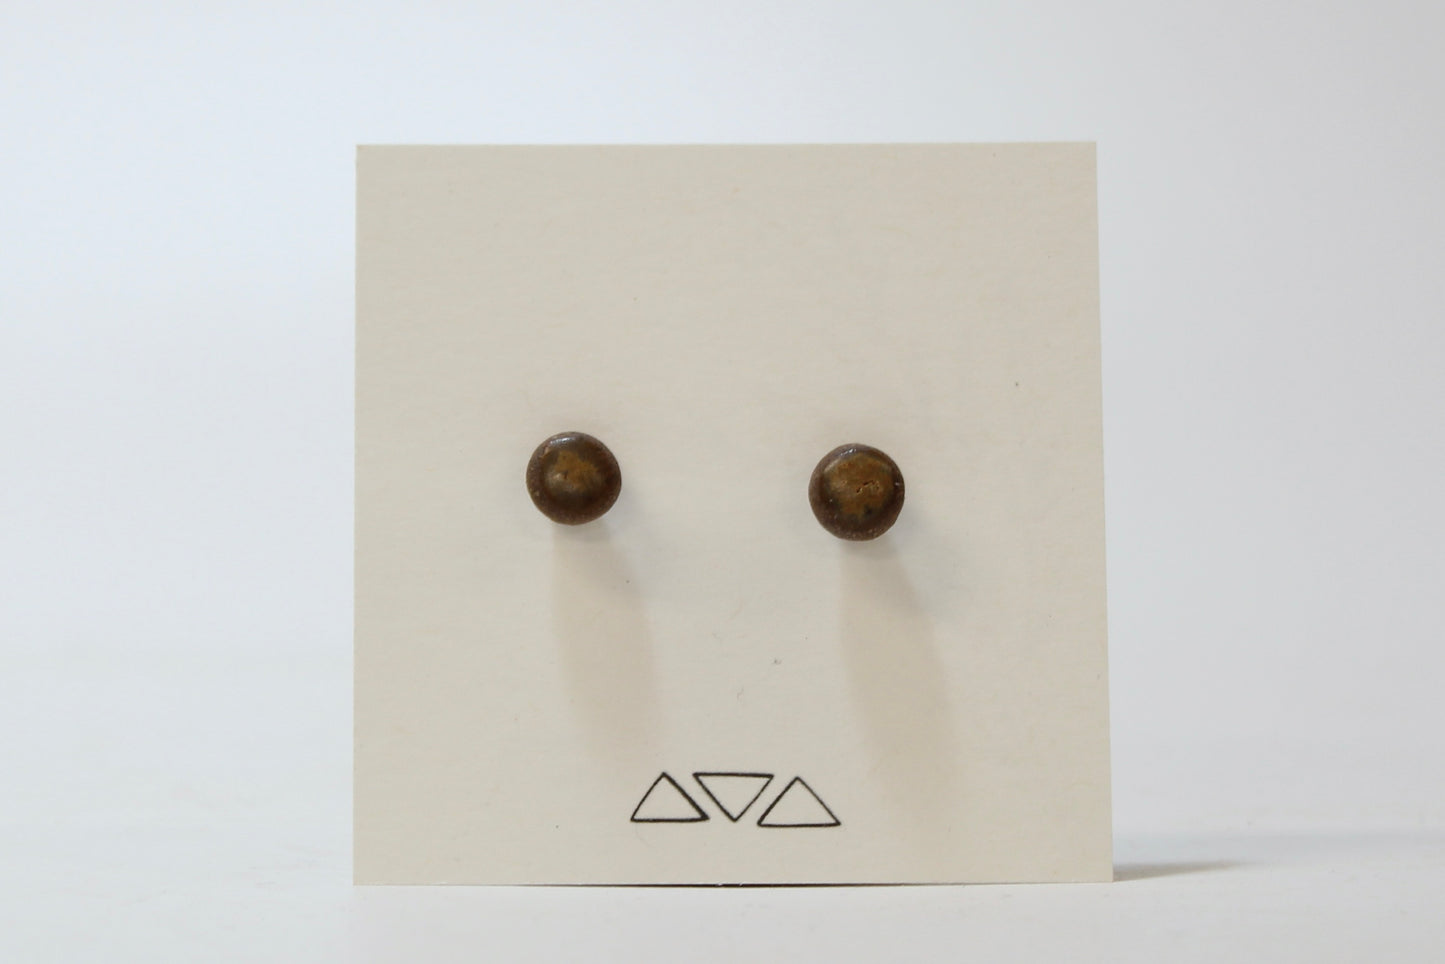 211. Sienna Dot Stud Earrings. Stainless steel stud with stabilizer backs. 1/2"